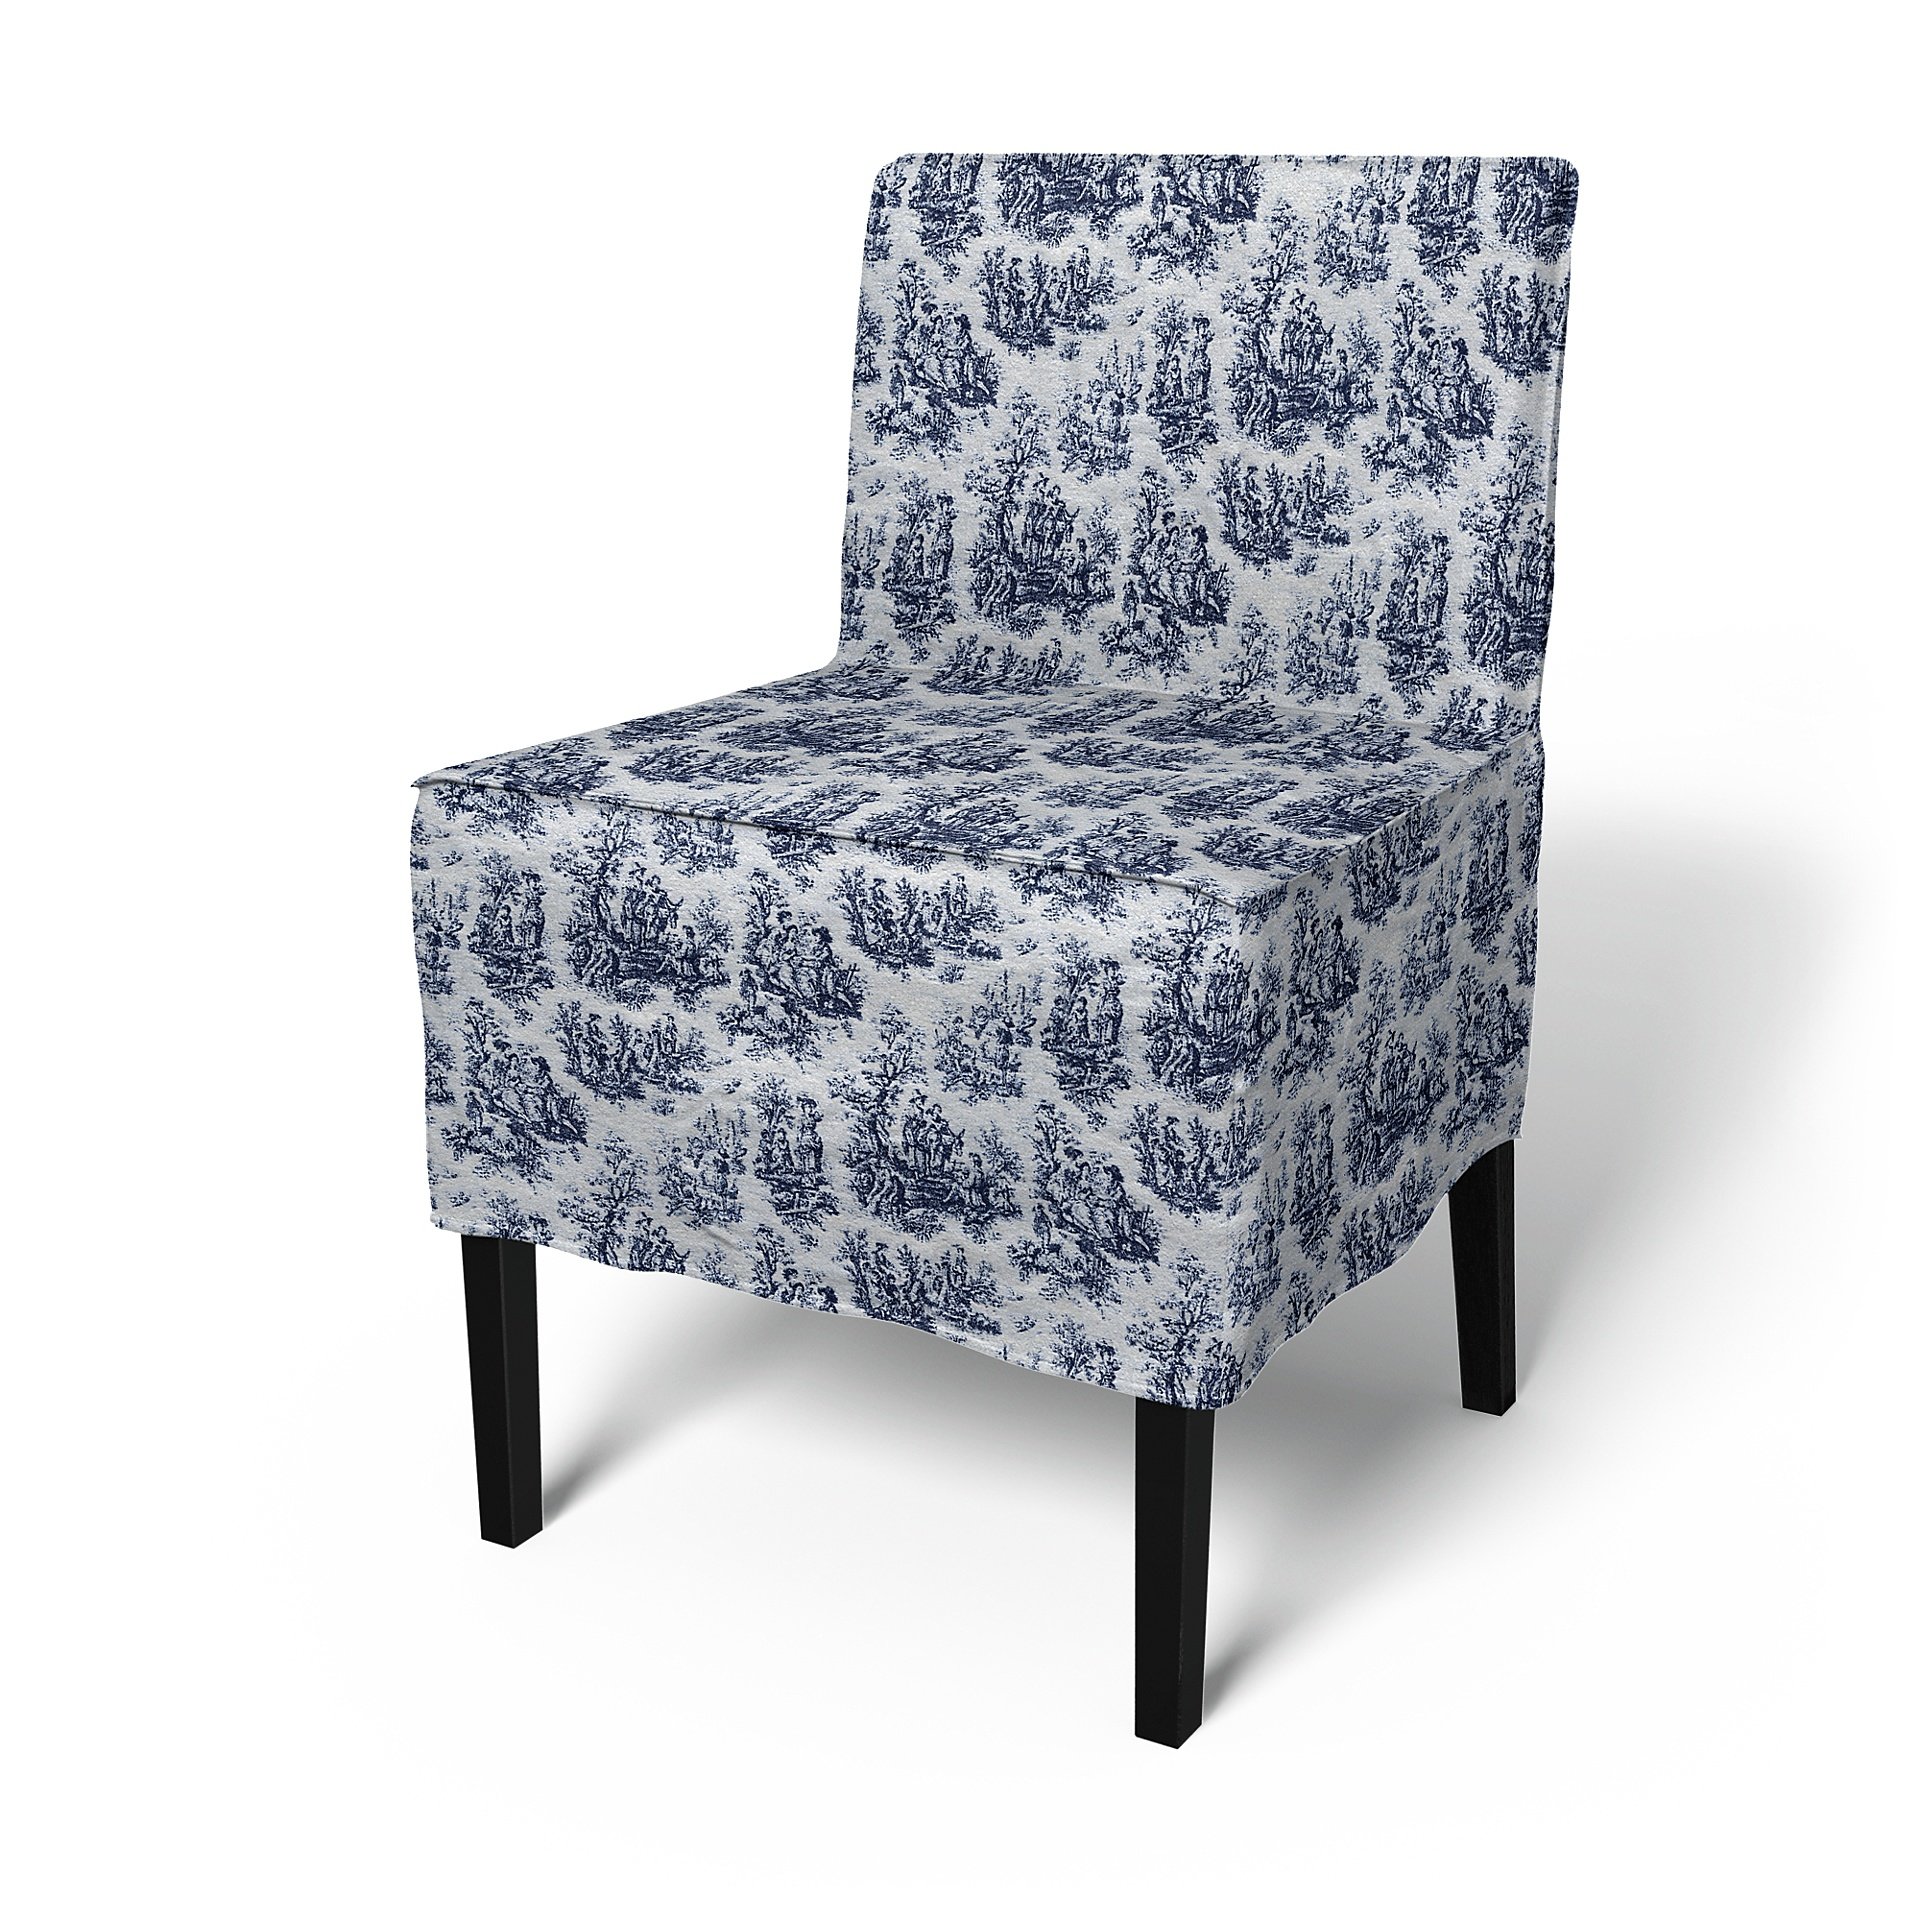 IKEA - Nils Dining Chair Cover, Dark Blue, Boucle & Texture - Bemz